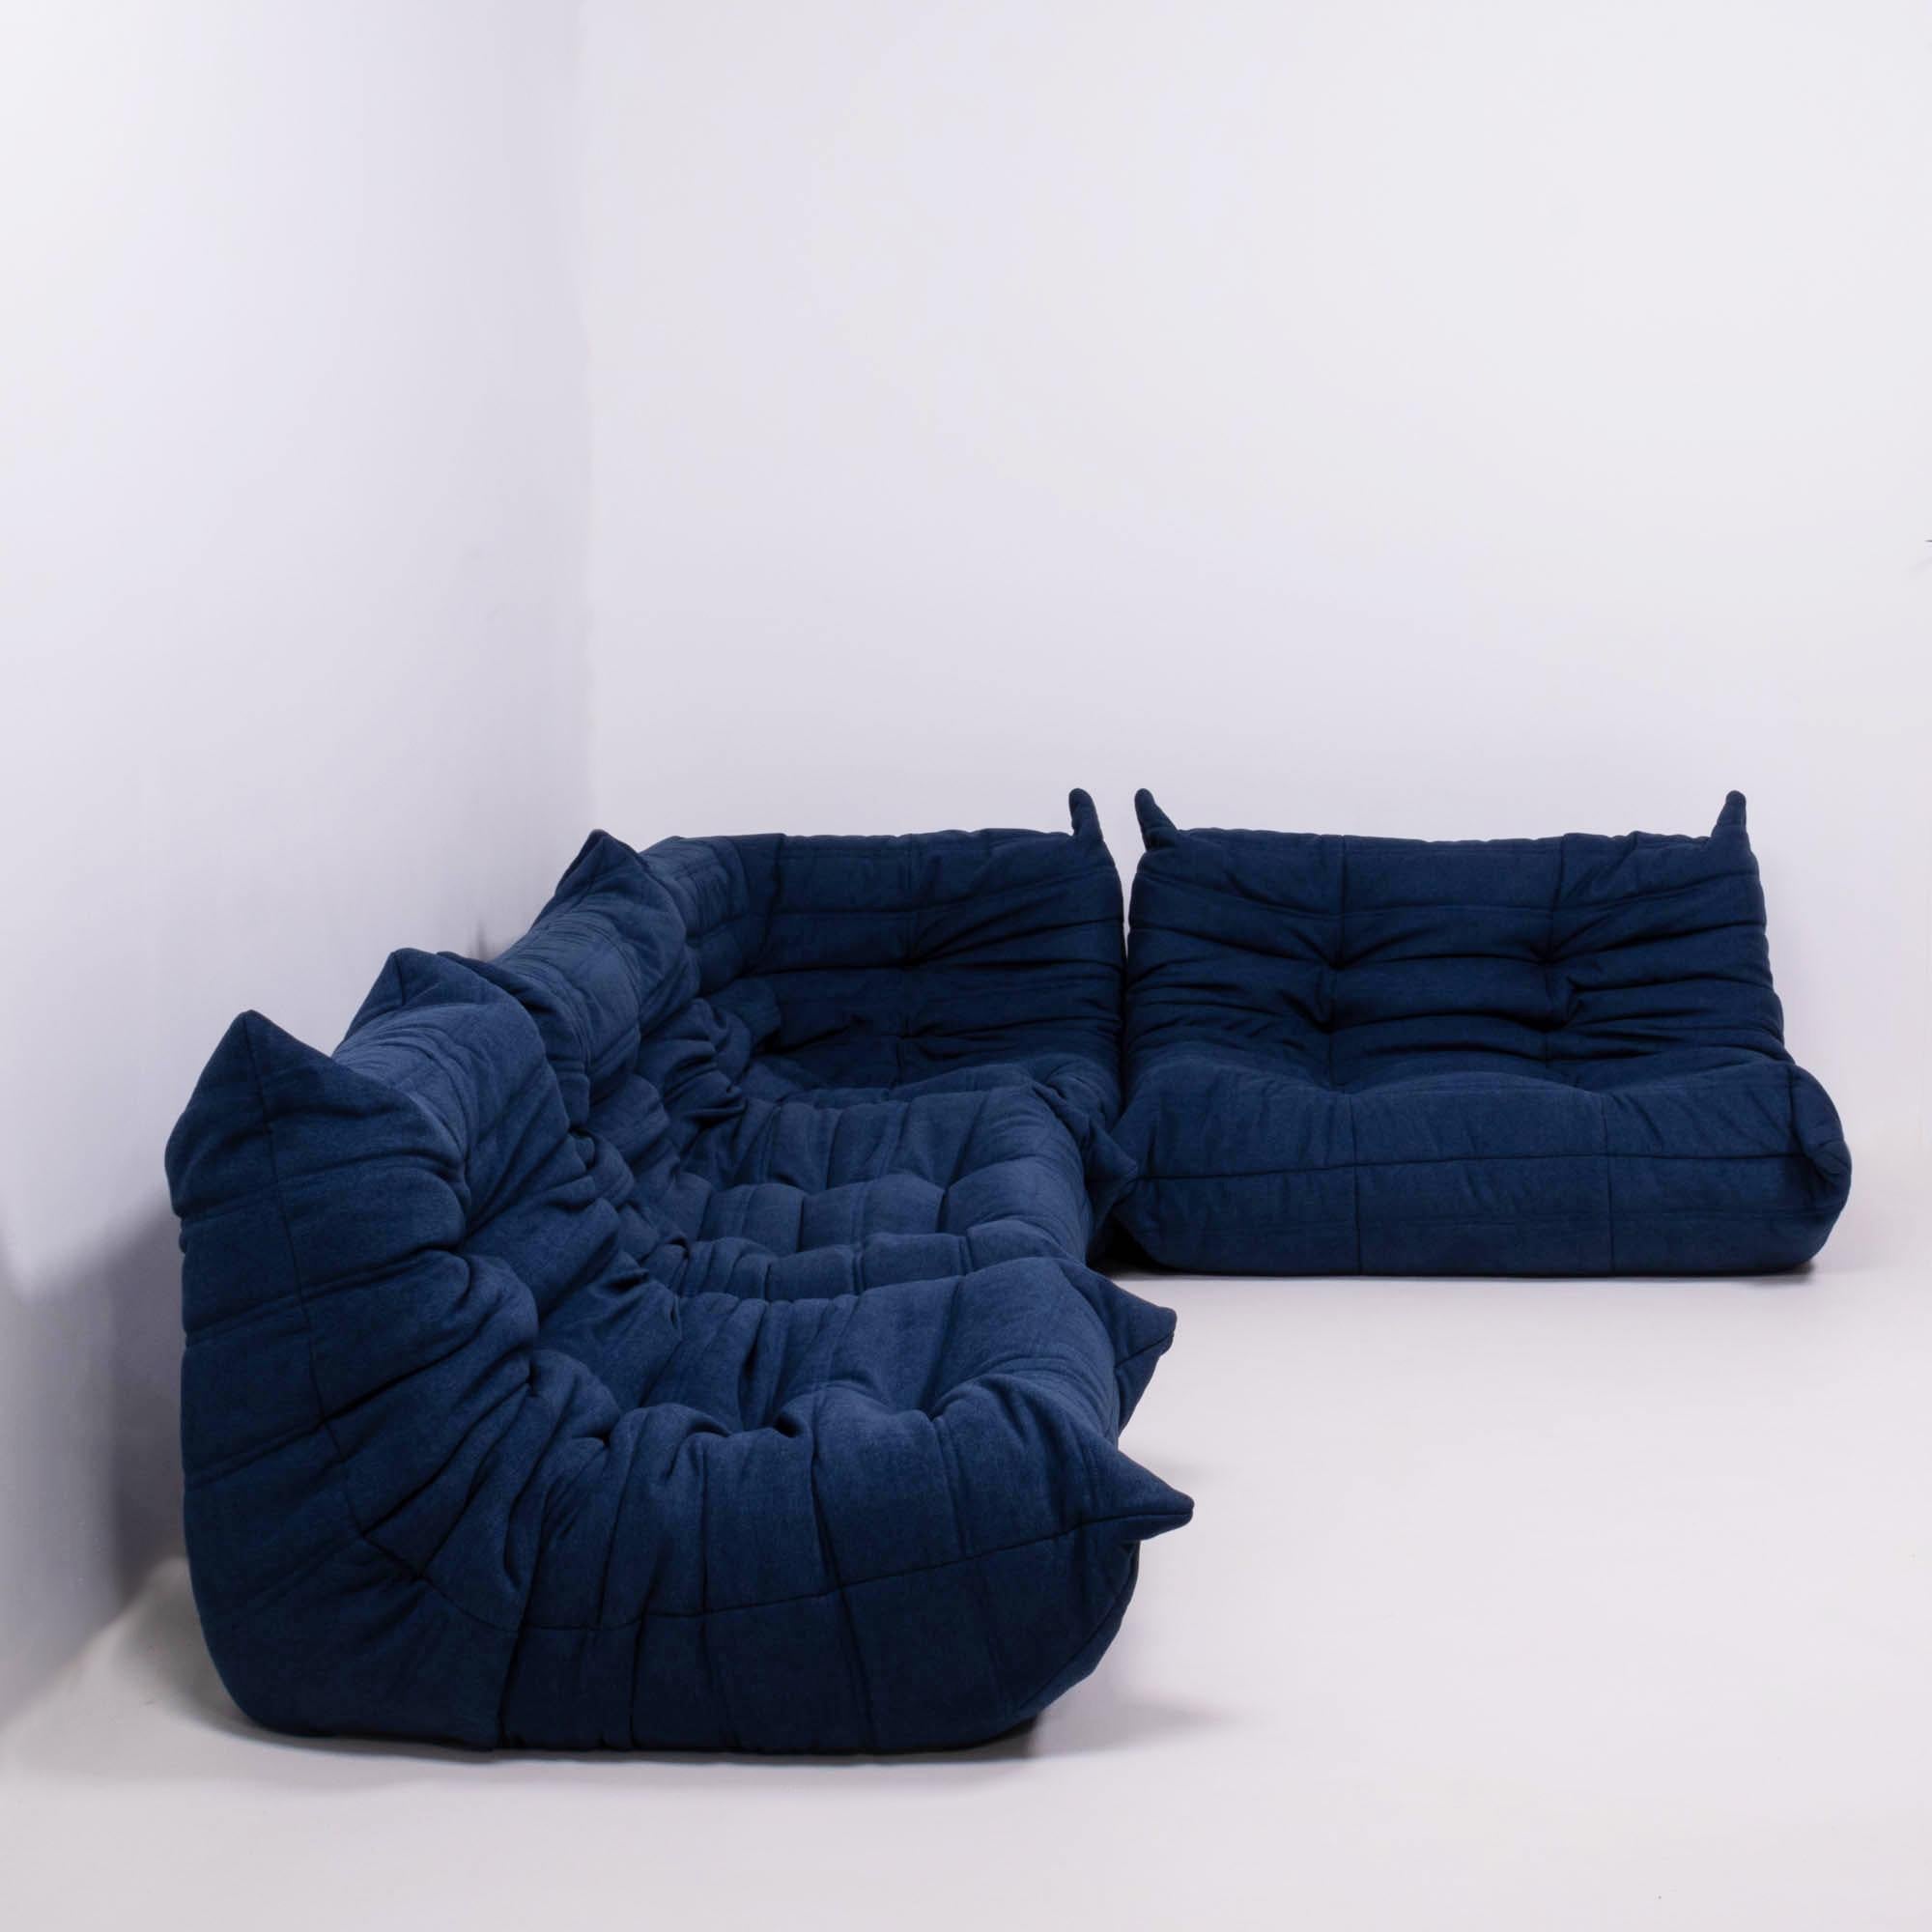 The iconic Togo sofa, originally designed by Michel Ducaroy for Ligne Roset in 1973, has become a design Classic. 

This four piece modular set is incredibly versatile and can be configured into one large corner sofa or split for a multitude of